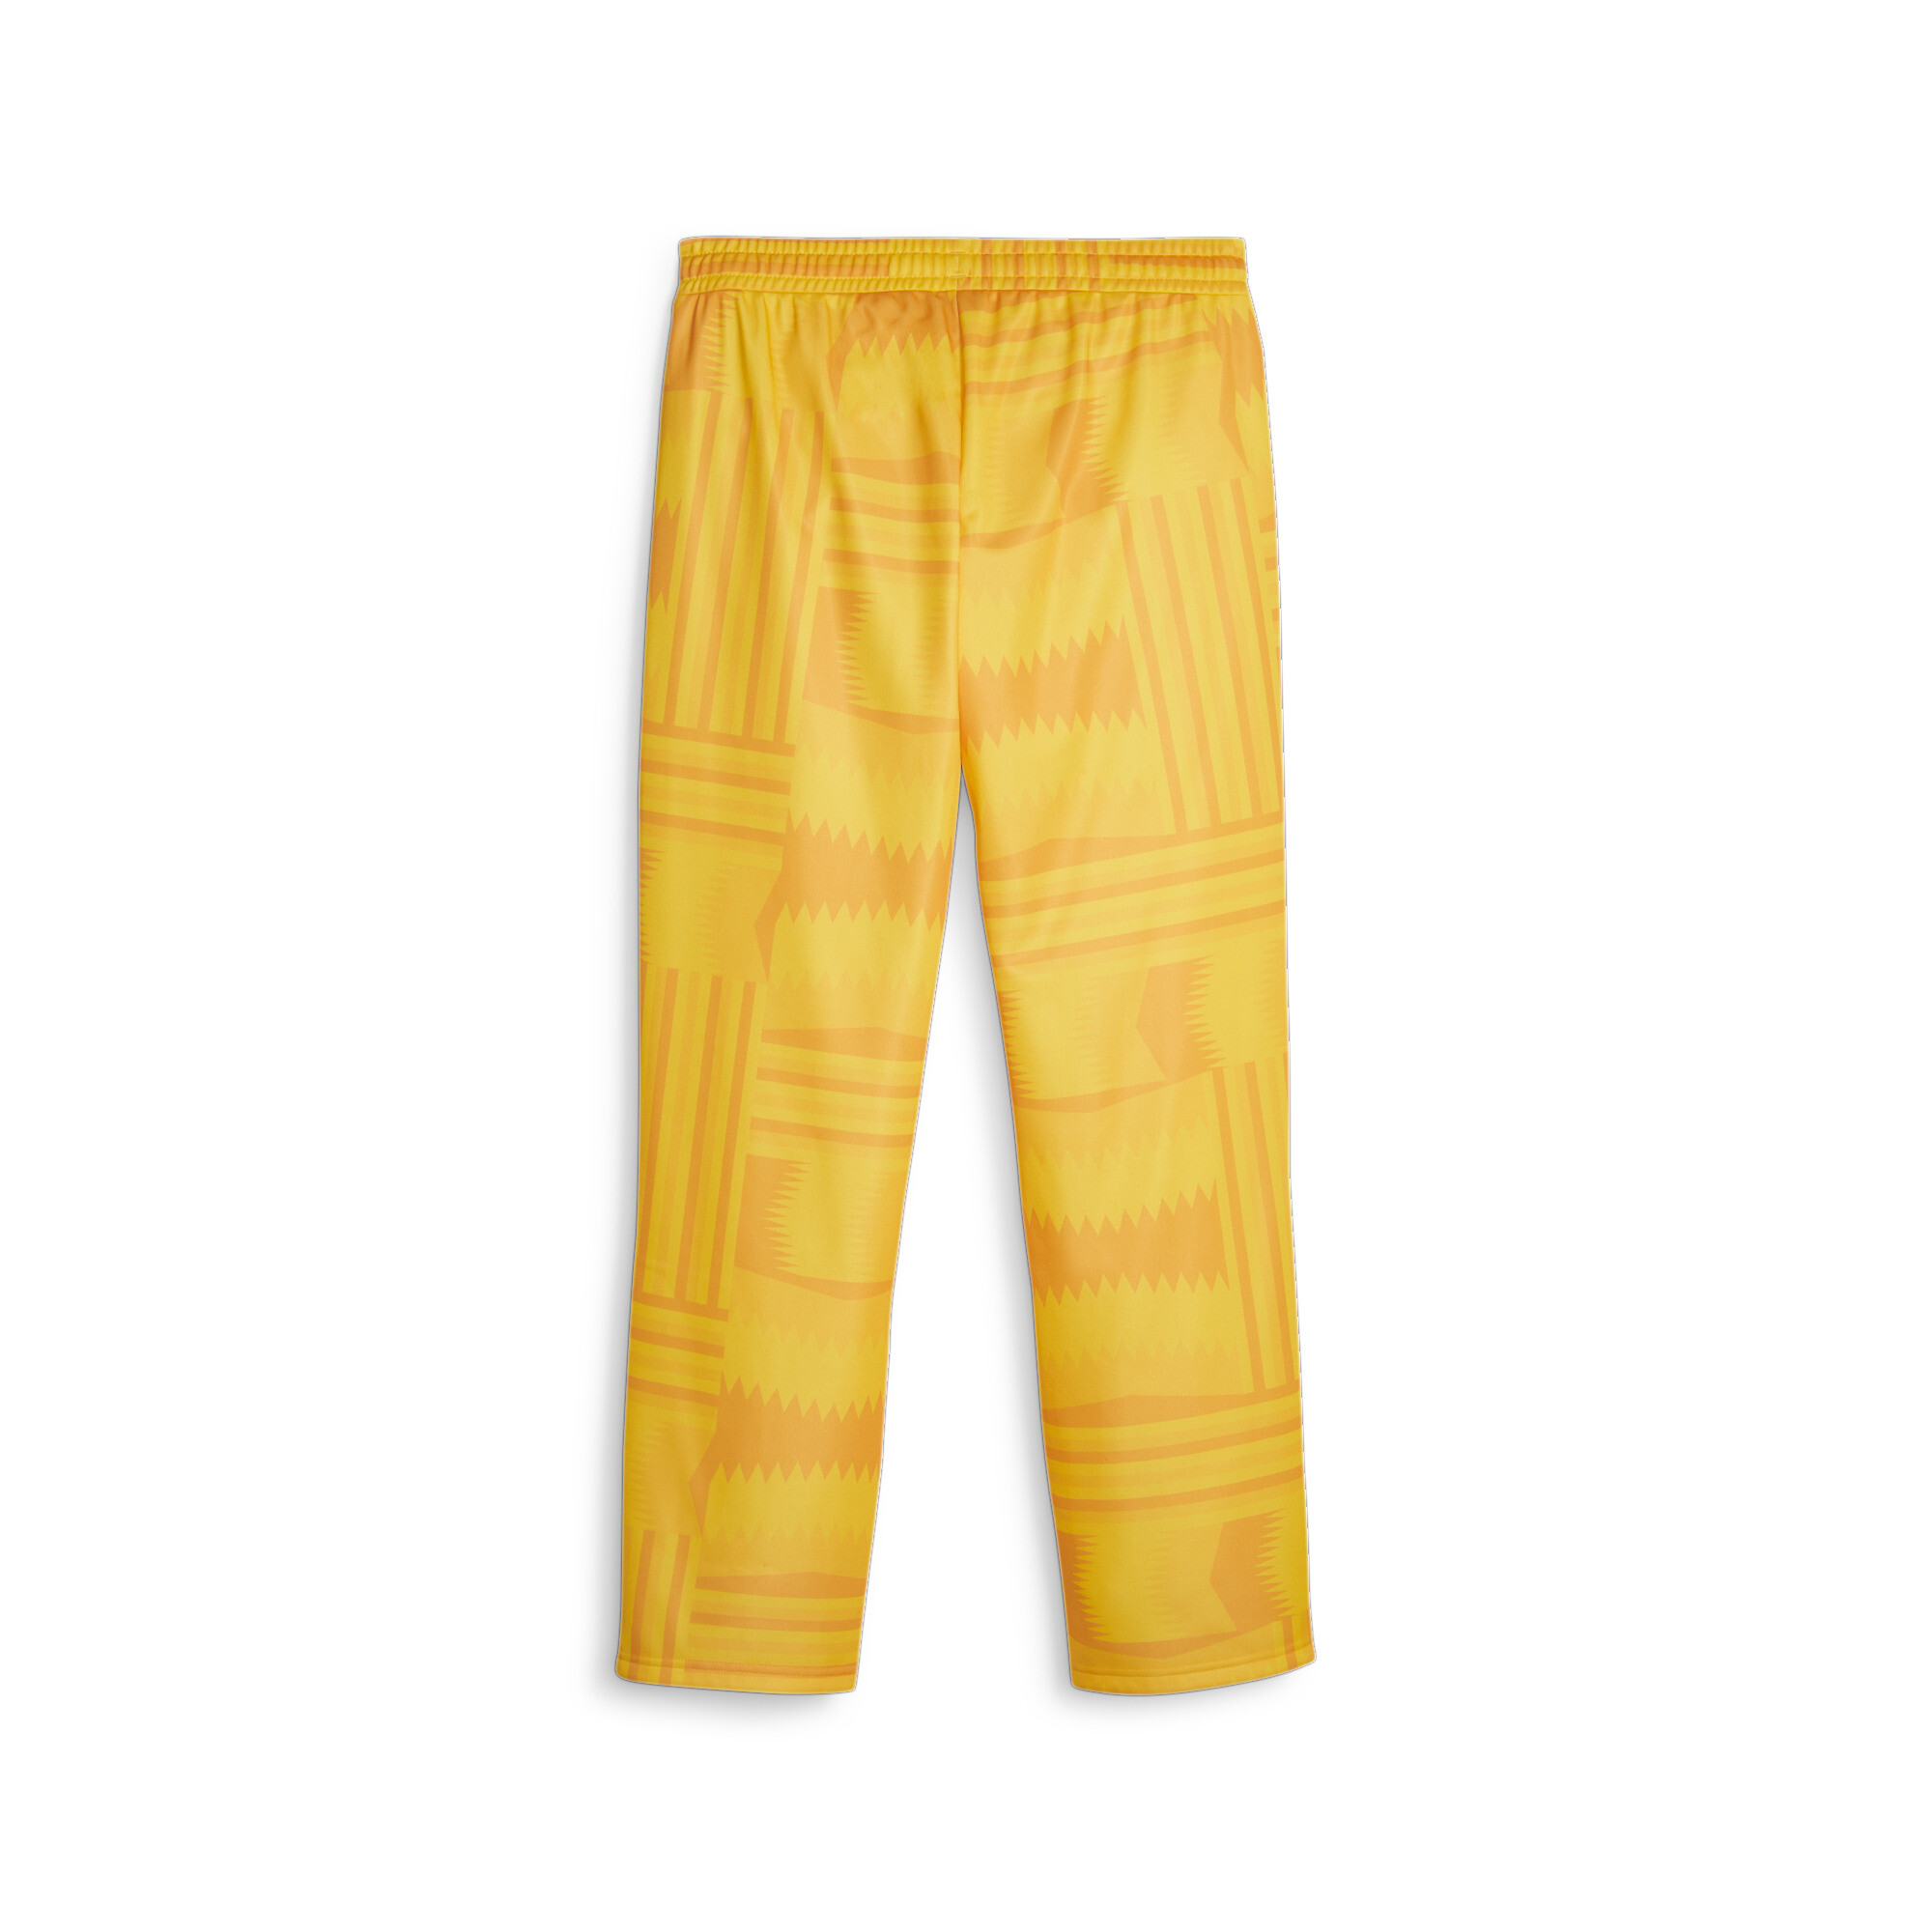 Men's PUMA Ghana FtblCulture Track Pants In Yellow, Size 2XL